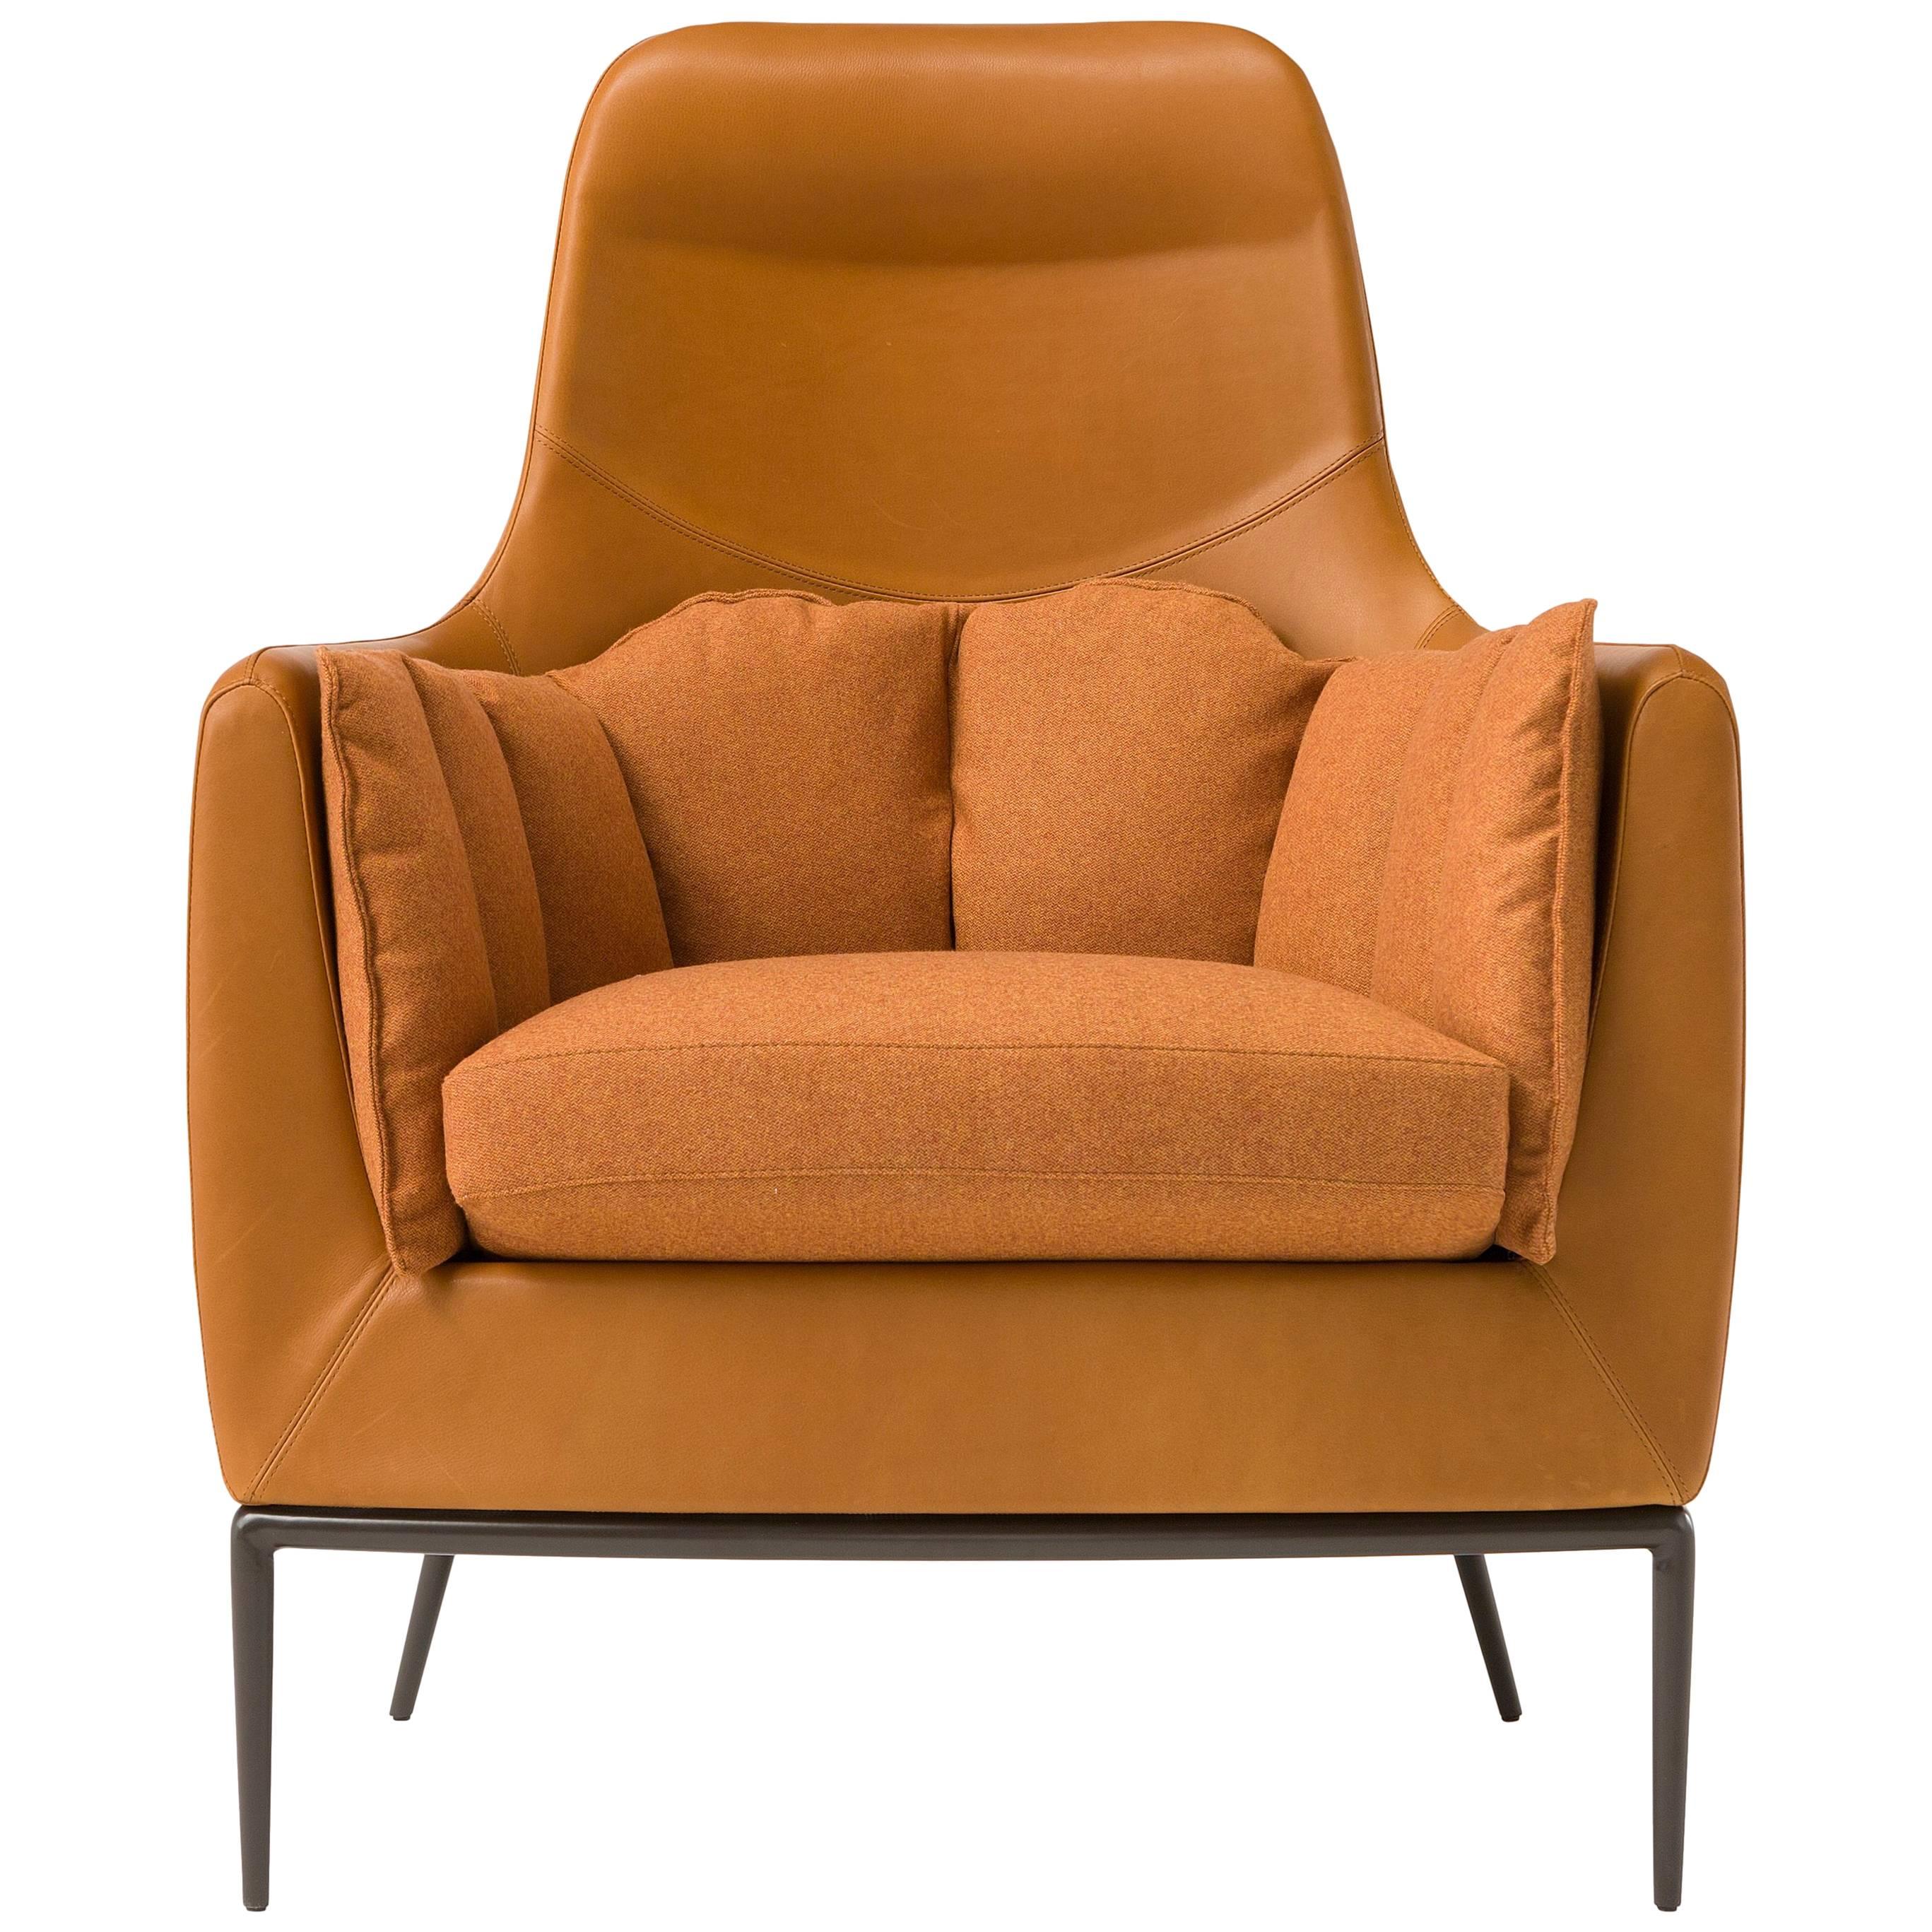 Tulip Armchair in Orange by Luca Scacchetti For Sale